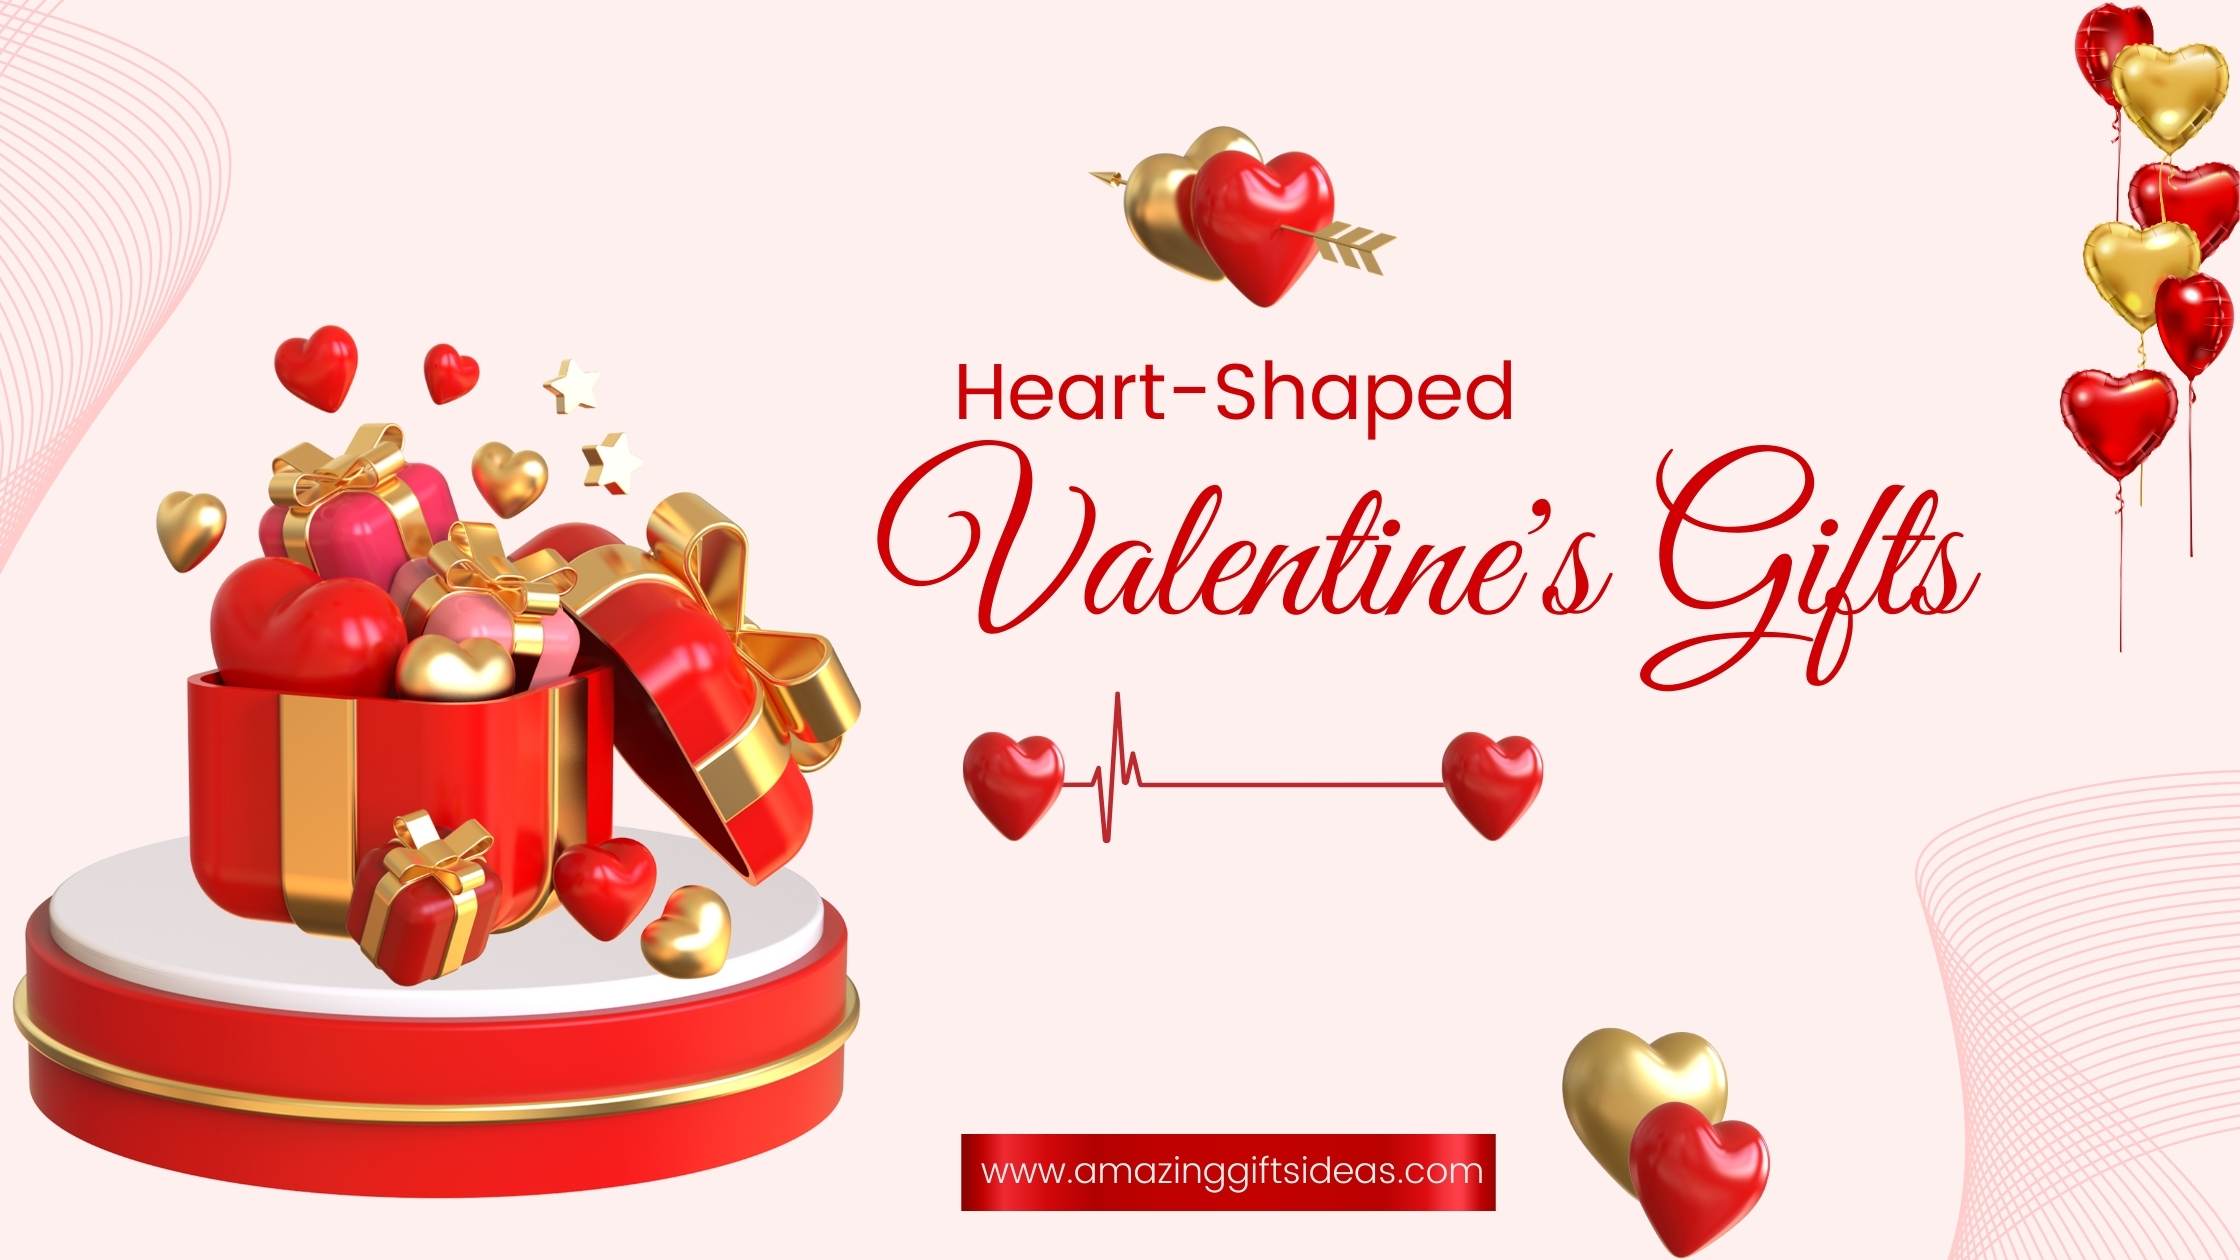 Best Heart Shaped Gifts For Valentine Day - Amazing Gifts Idea